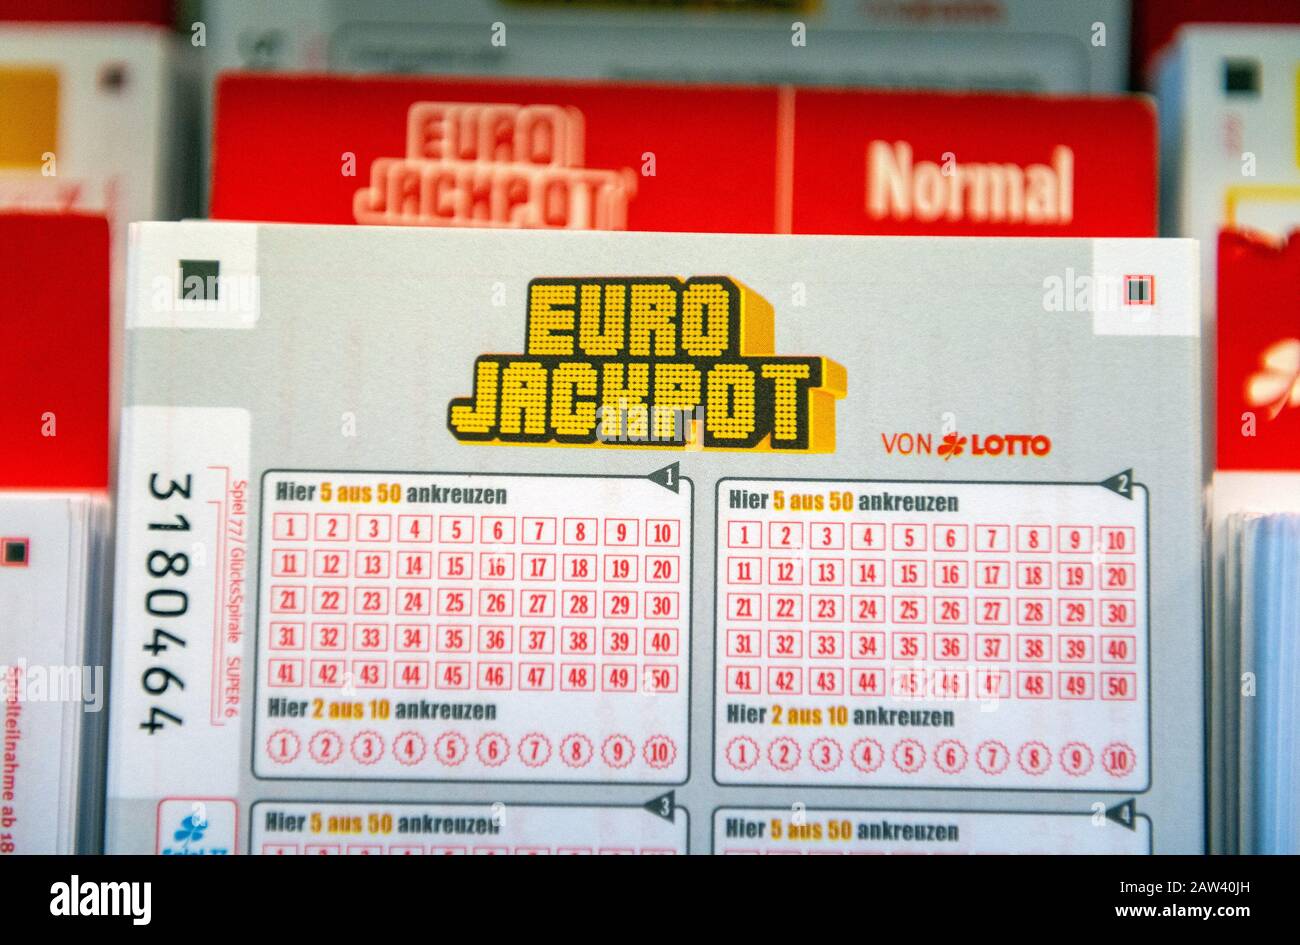 Eurojackpot High Resolution Stock Photography and Images - Alamy